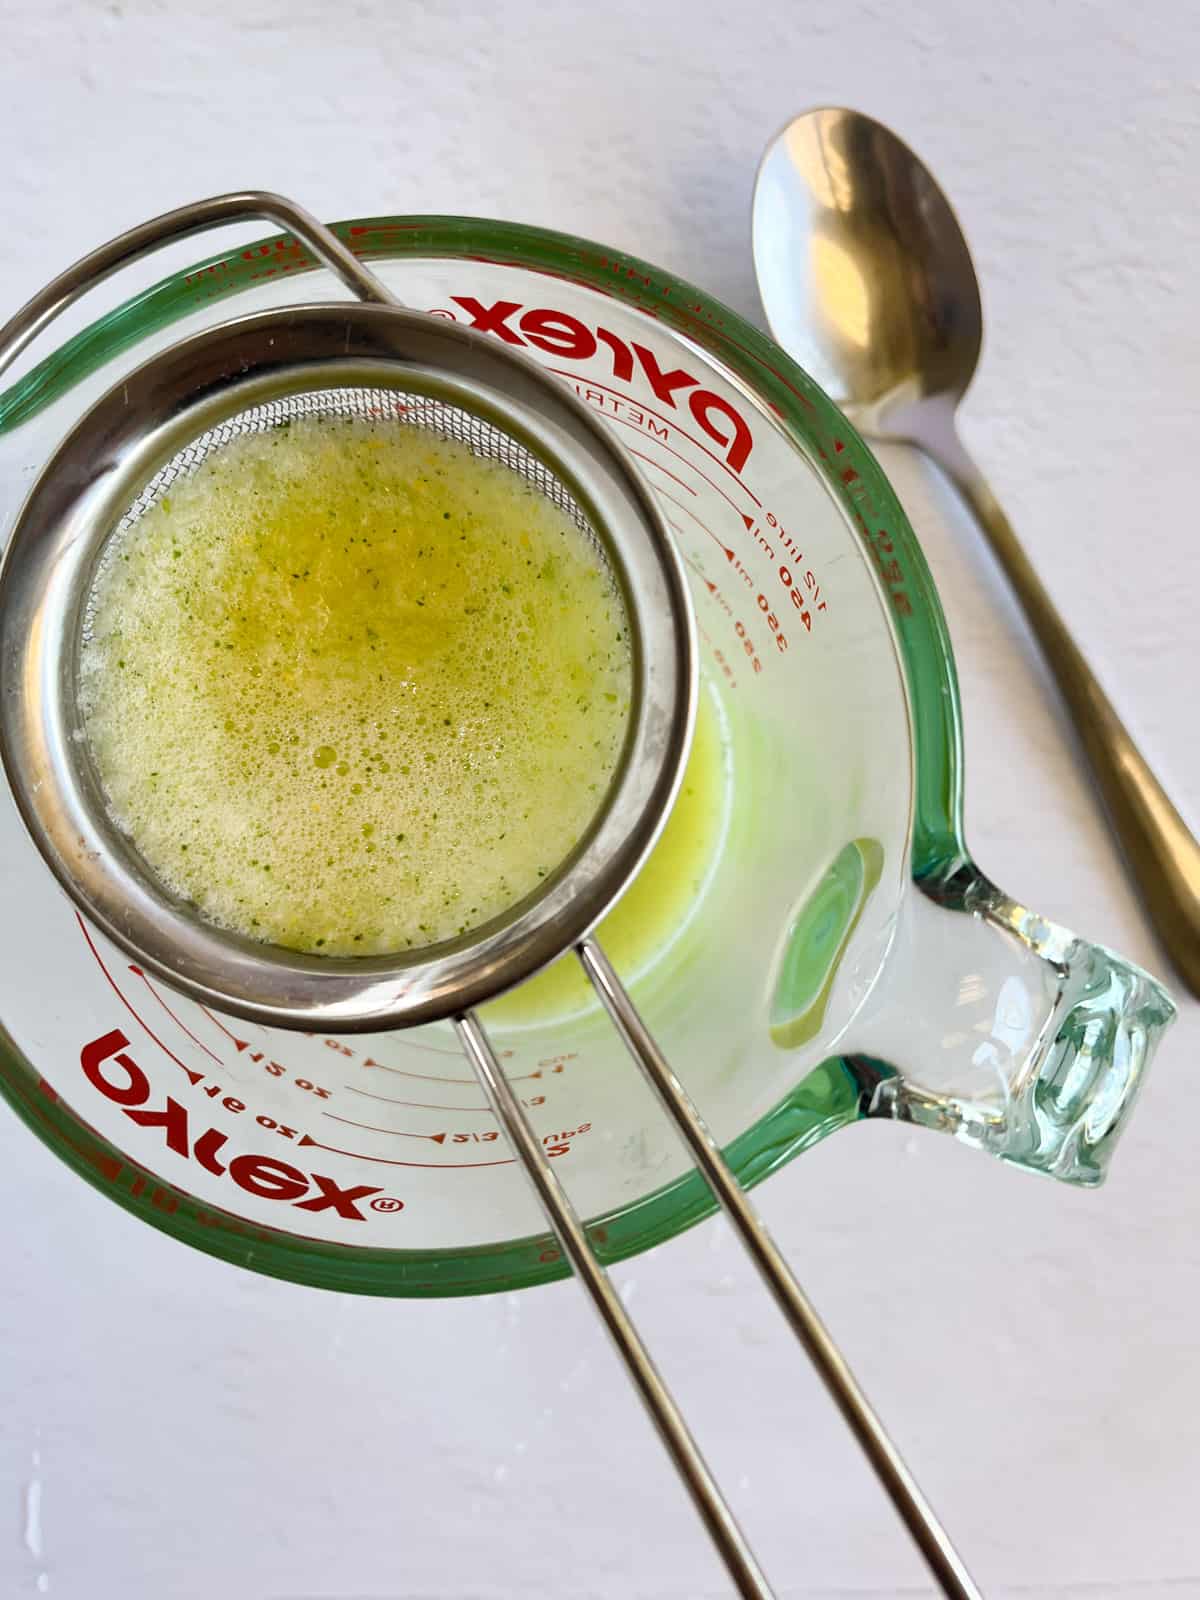 a strainer over a jug with yellow juice and bits of yellow lemon through it